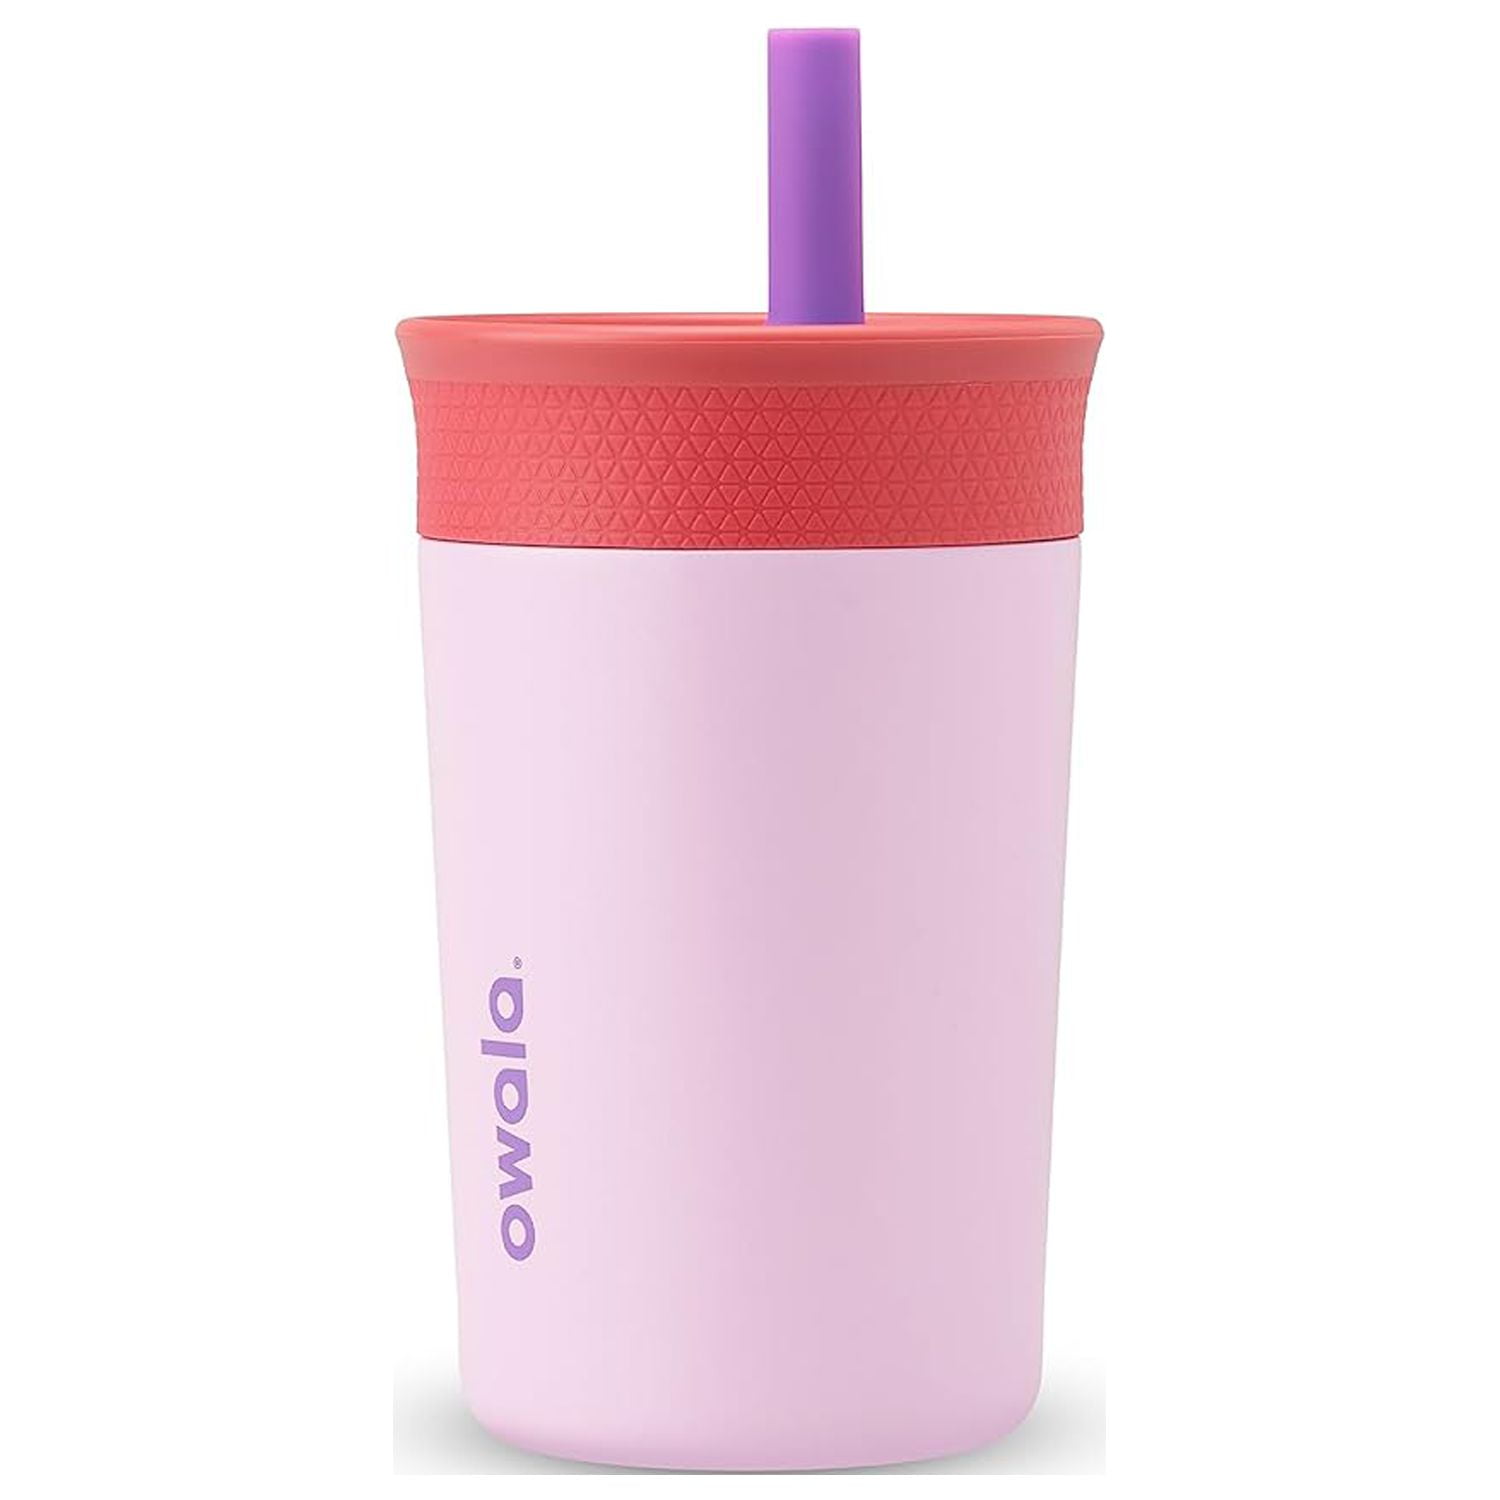 RUN! My Favorite Owala Tumbler is ONLY $27.38 (was $38)!!